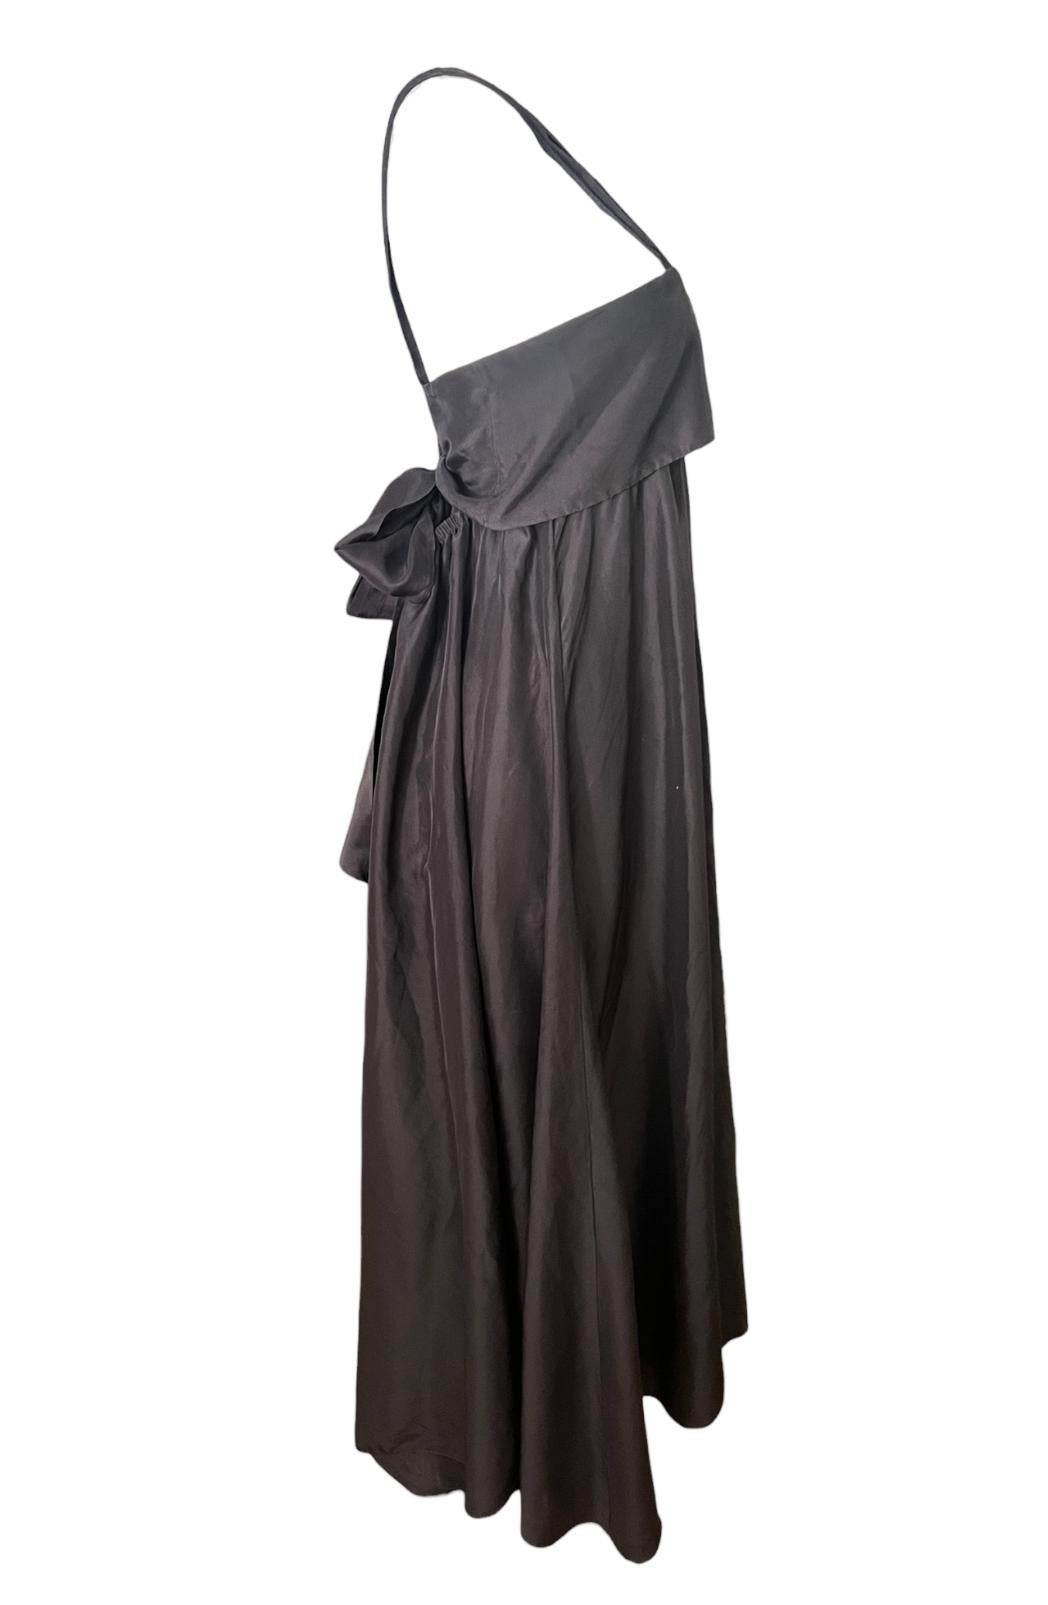 - Sleeveless with shoulder straps
- Open back 
- Rear bow tie detail
- Floor length
- Light fabric
- Loose fit
- Made in Italy  